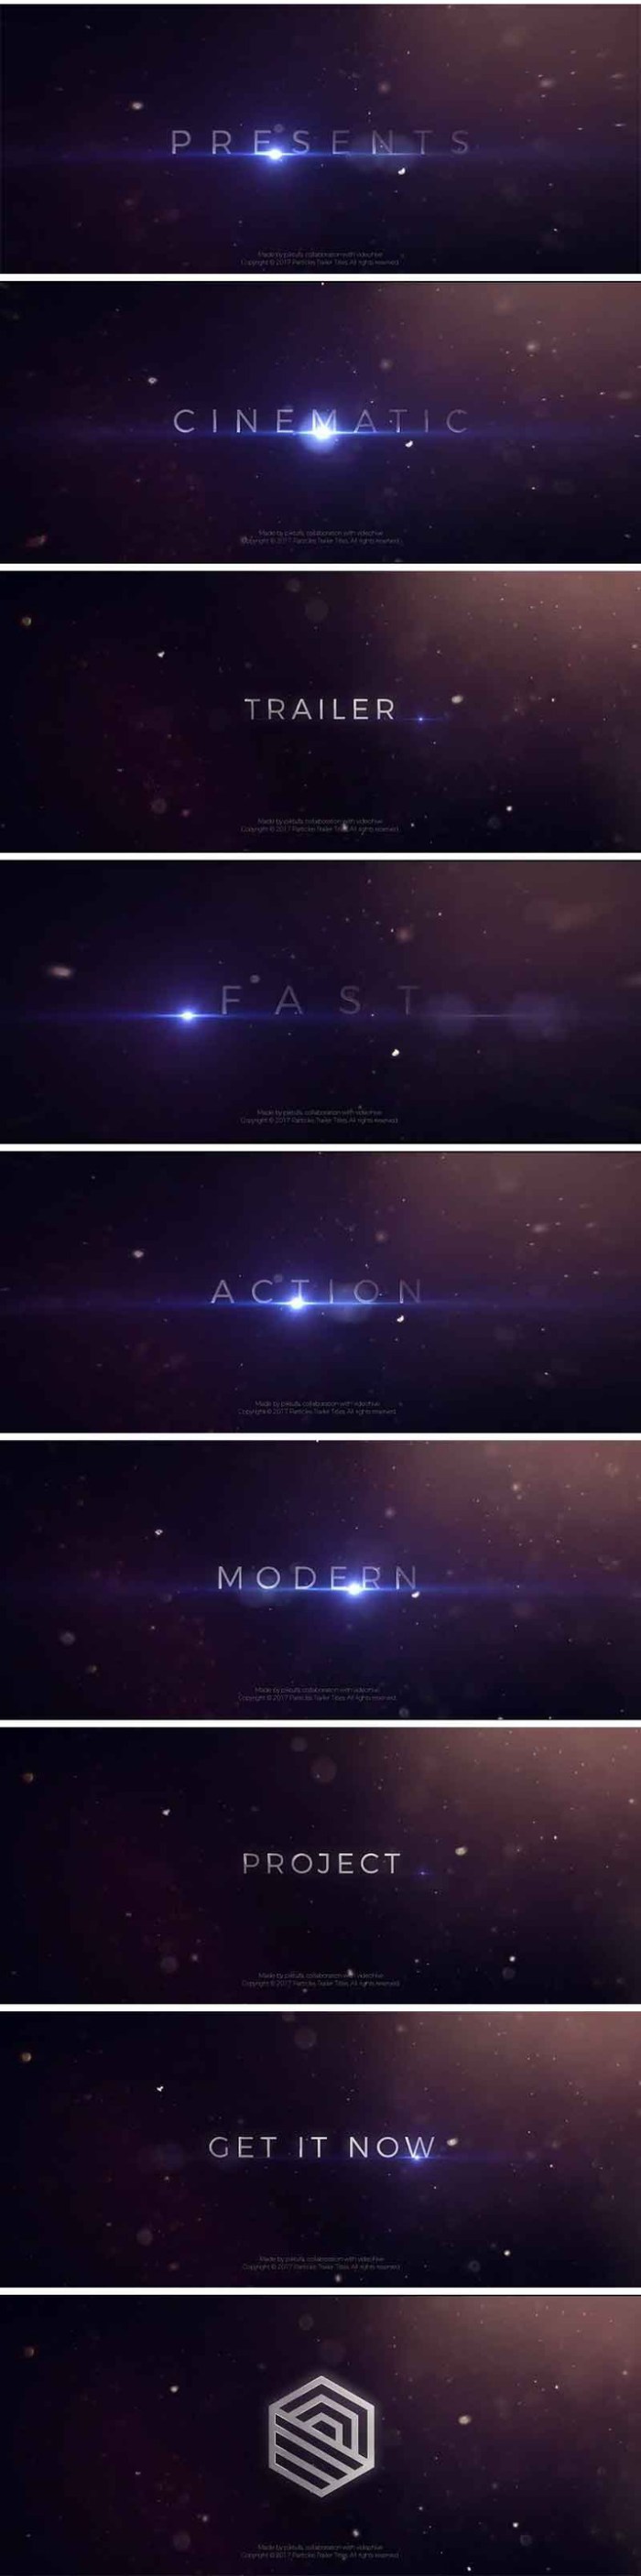 videohive_particles_trailer_titles_19302426